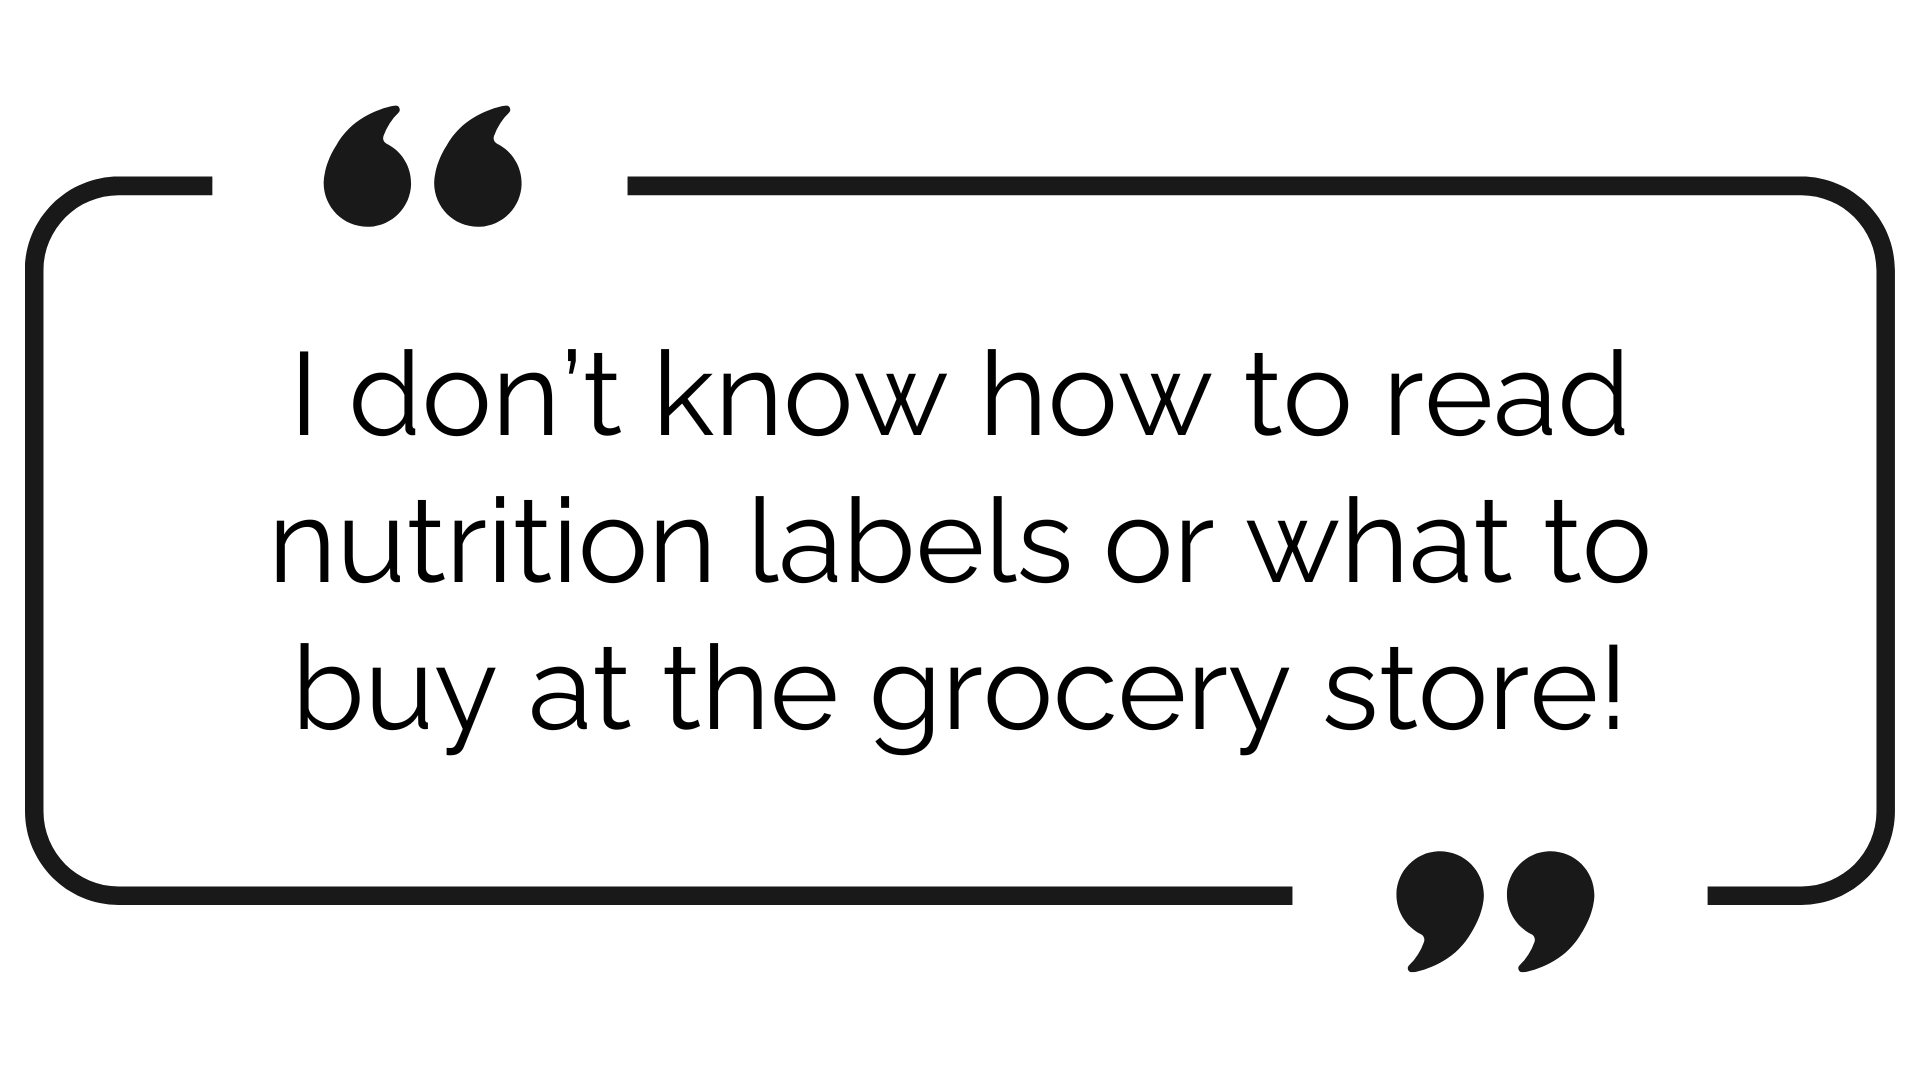 I don't know how to read nutrition labels or what to buy at the grocery store.